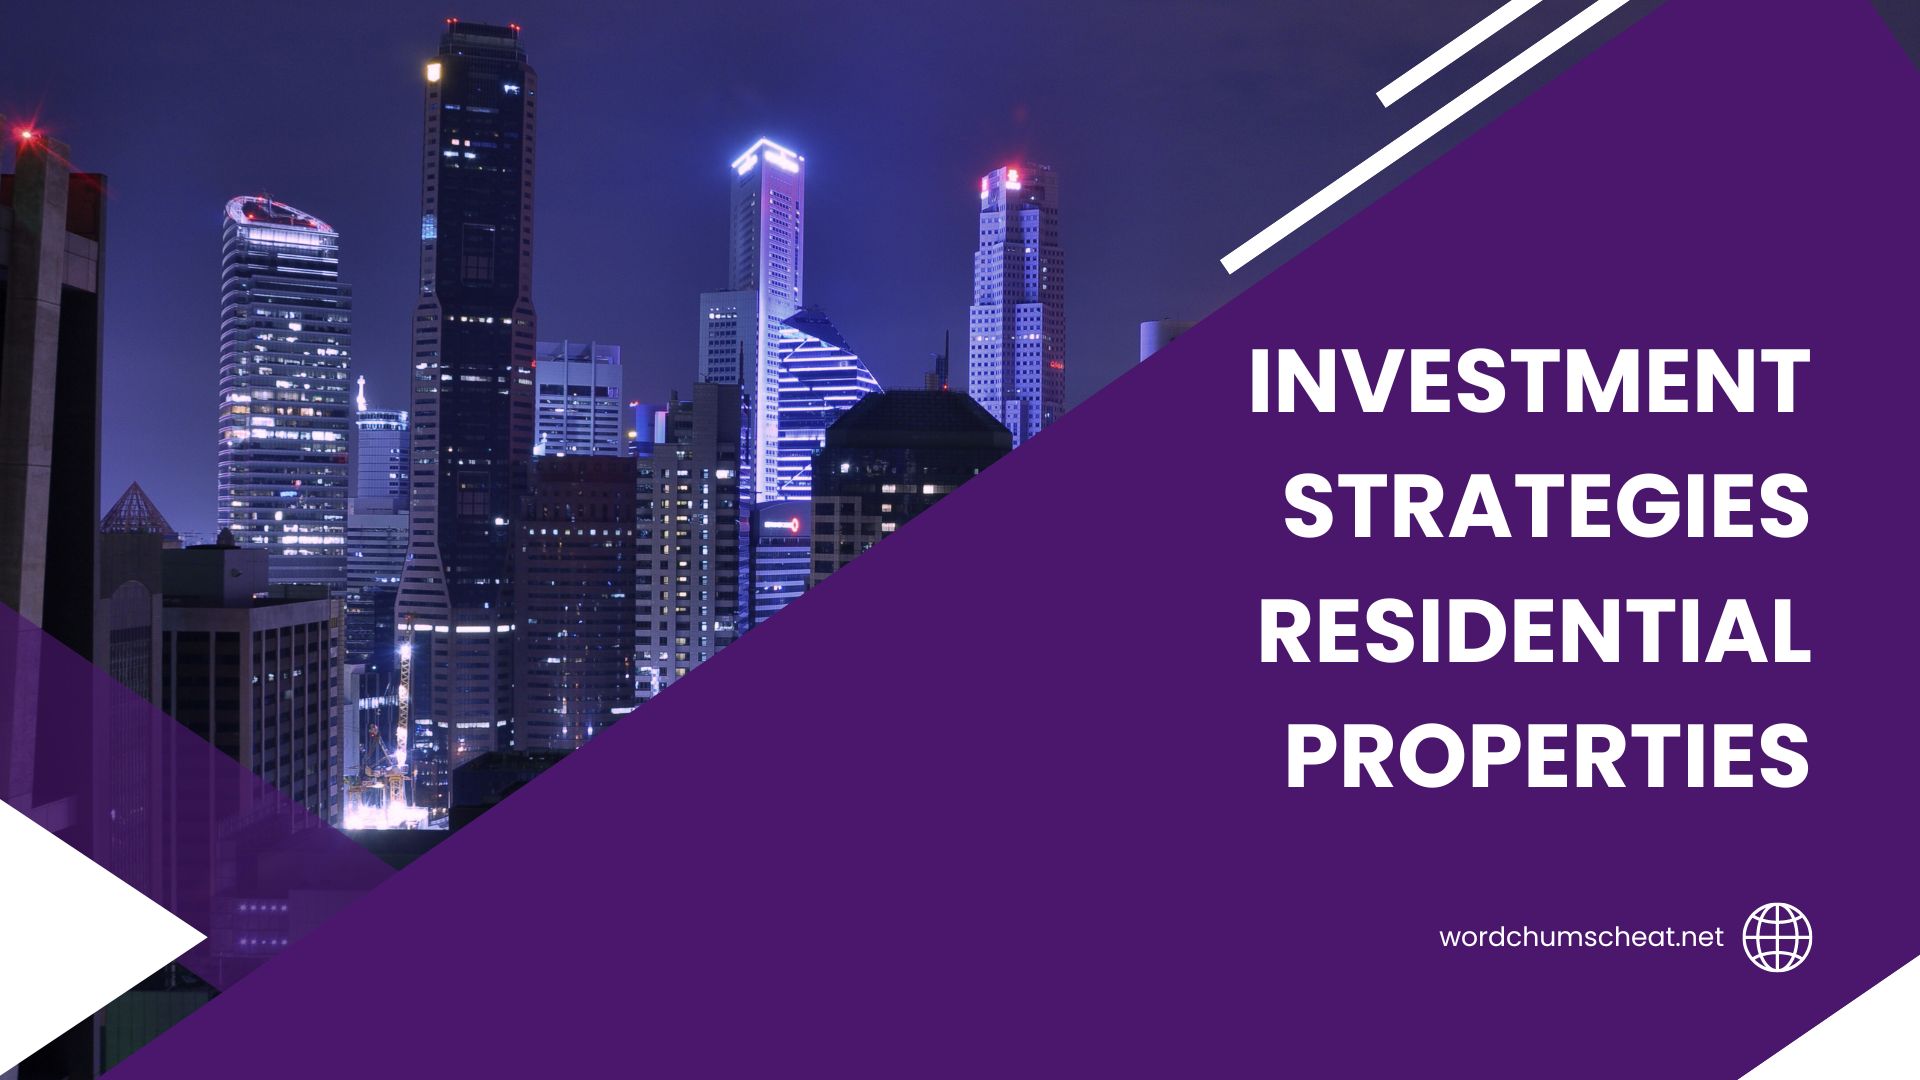 Investment Strategies for Residential Properties